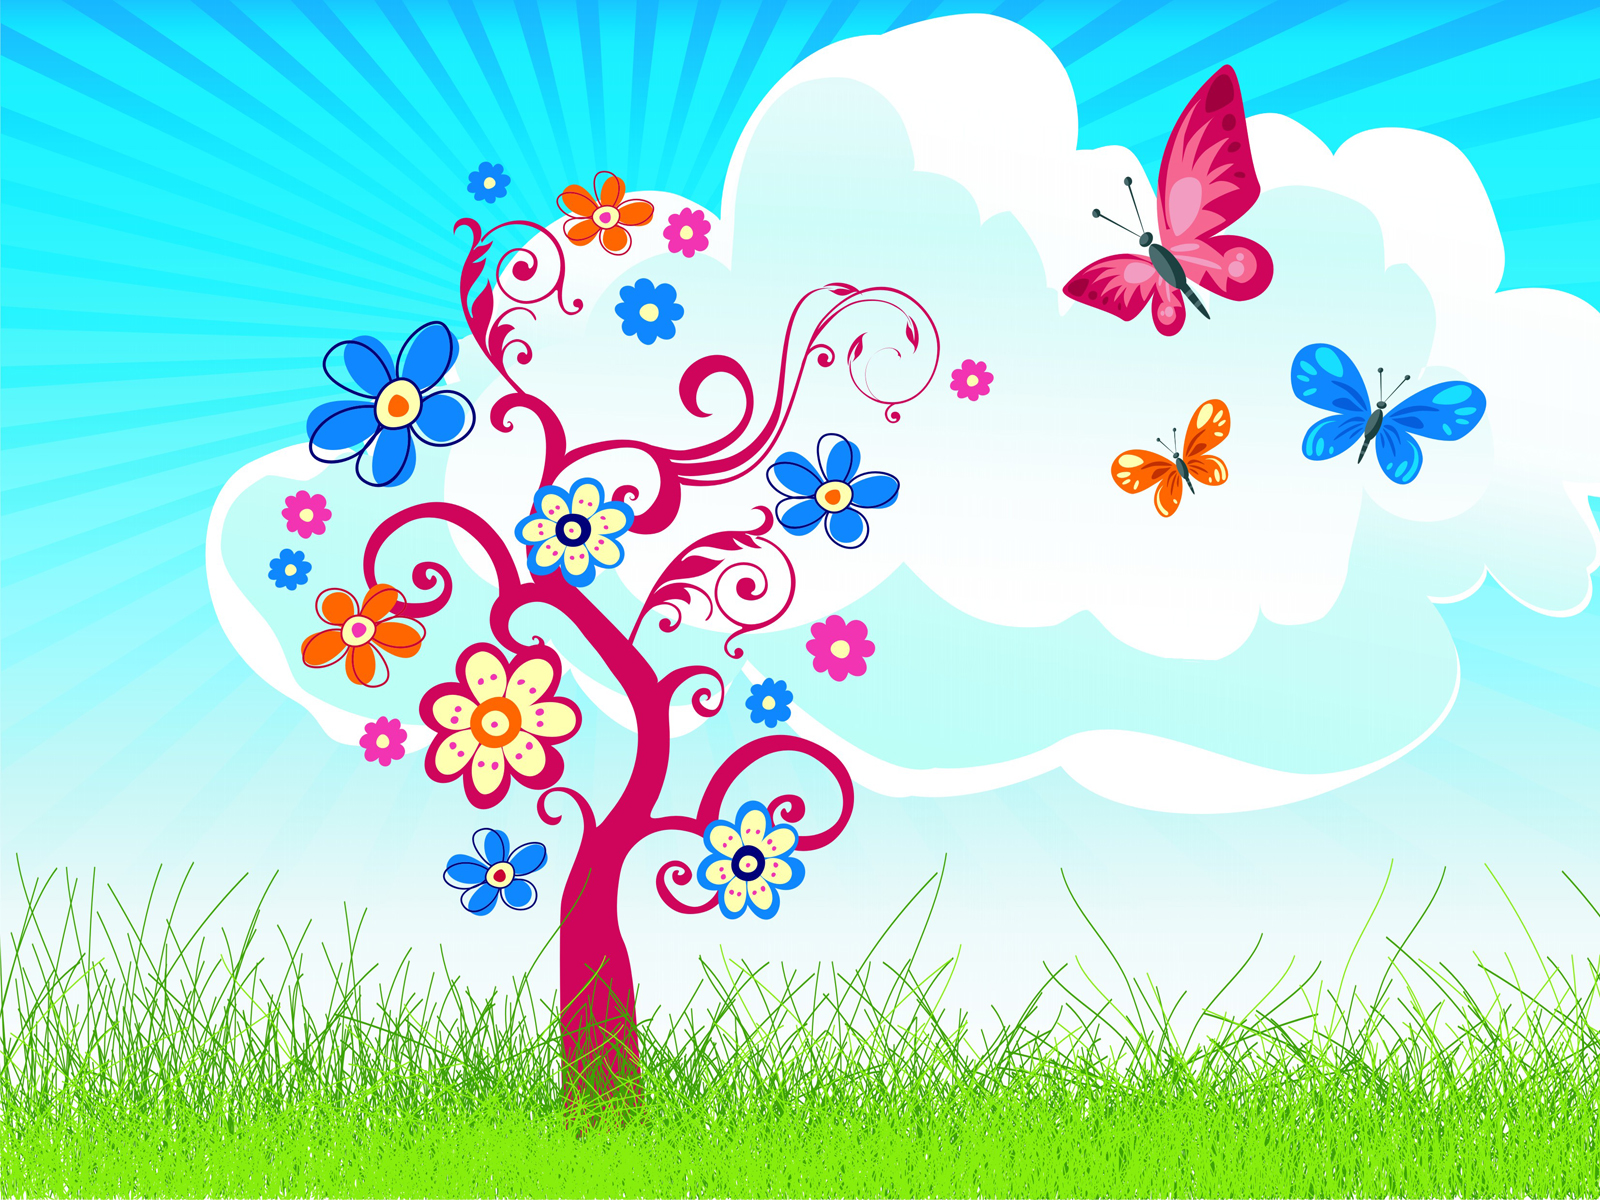 Desktop Animated Butterfly Wallpaper Dowload 3d HD Picture Design